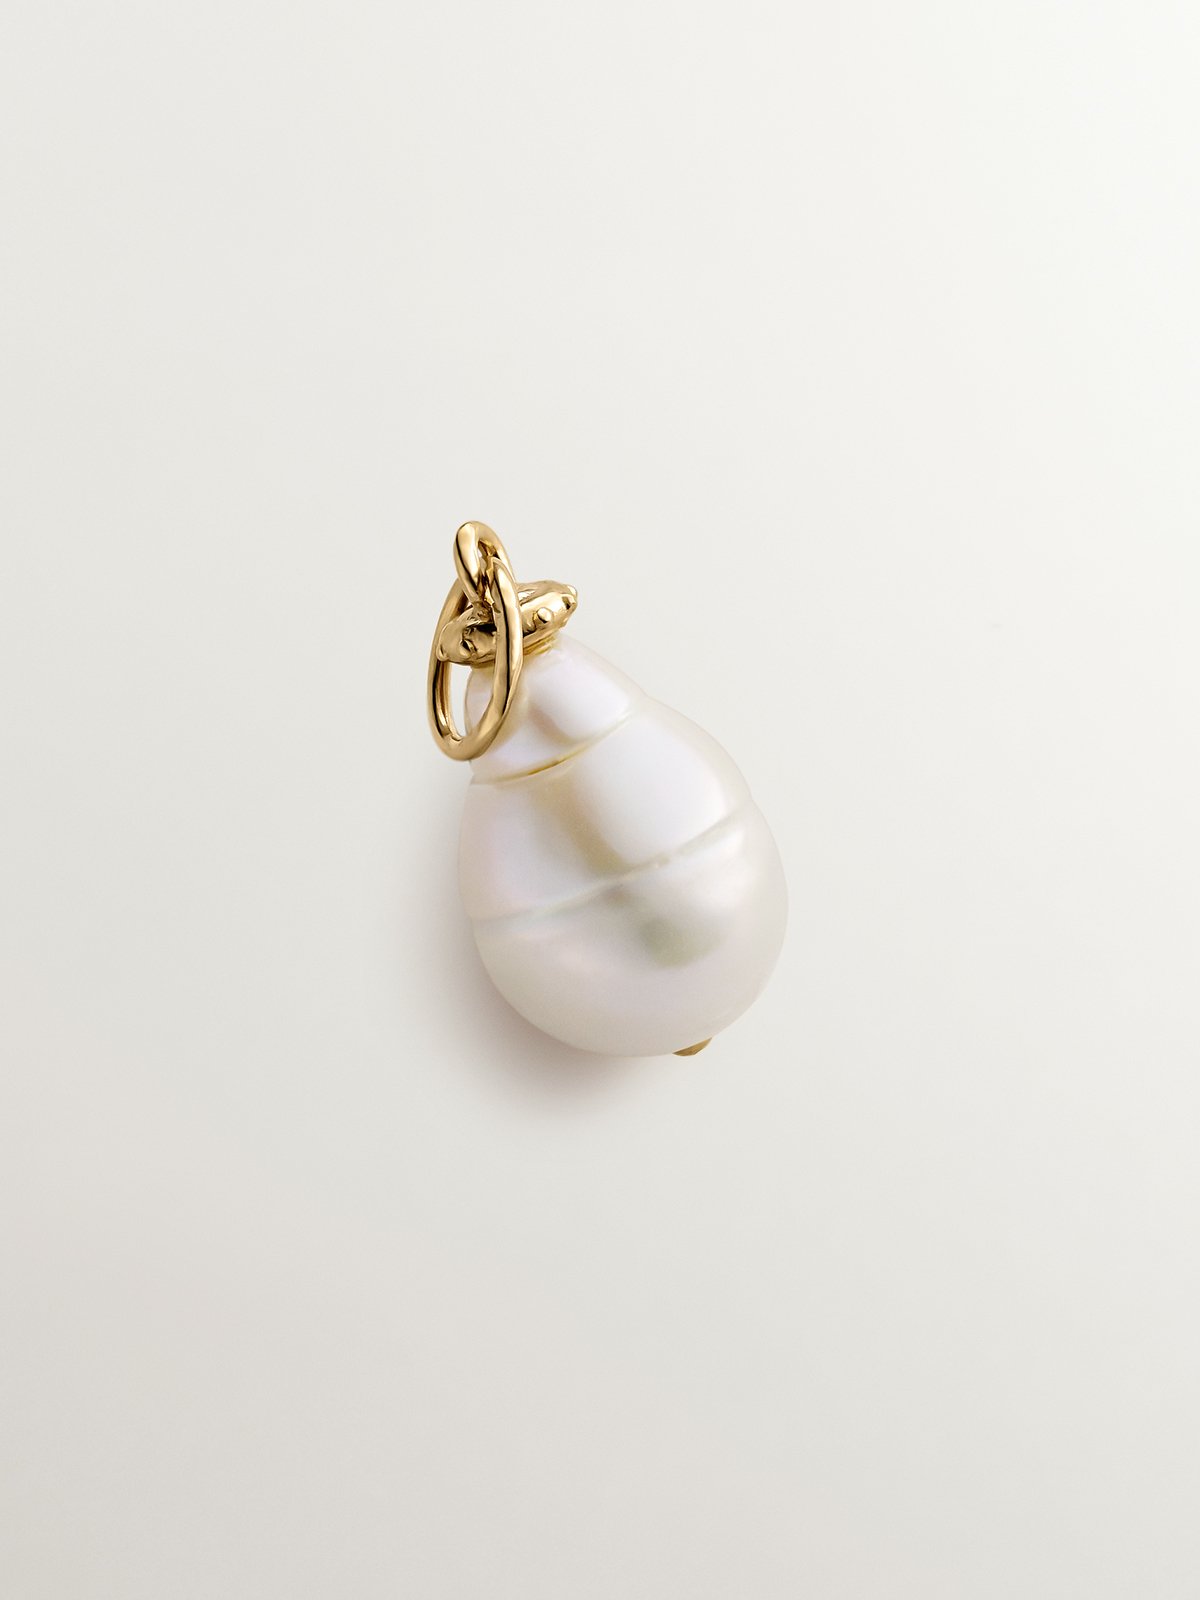 18K yellow gold-plated 925 silver charm with pearl.